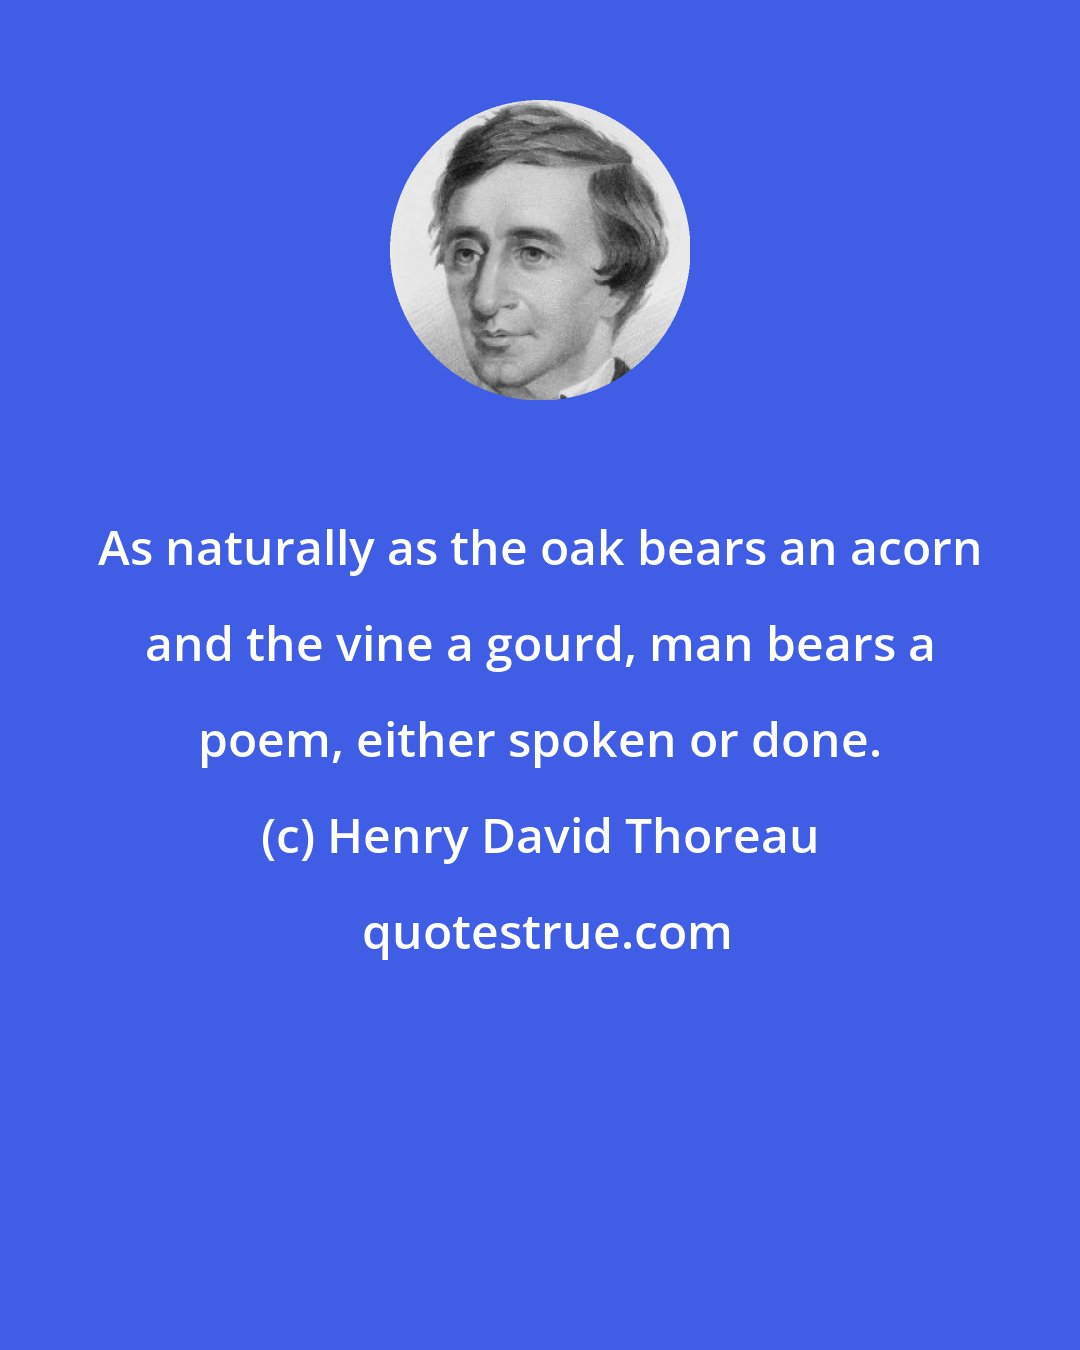 Henry David Thoreau: As naturally as the oak bears an acorn and the vine a gourd, man bears a poem, either spoken or done.